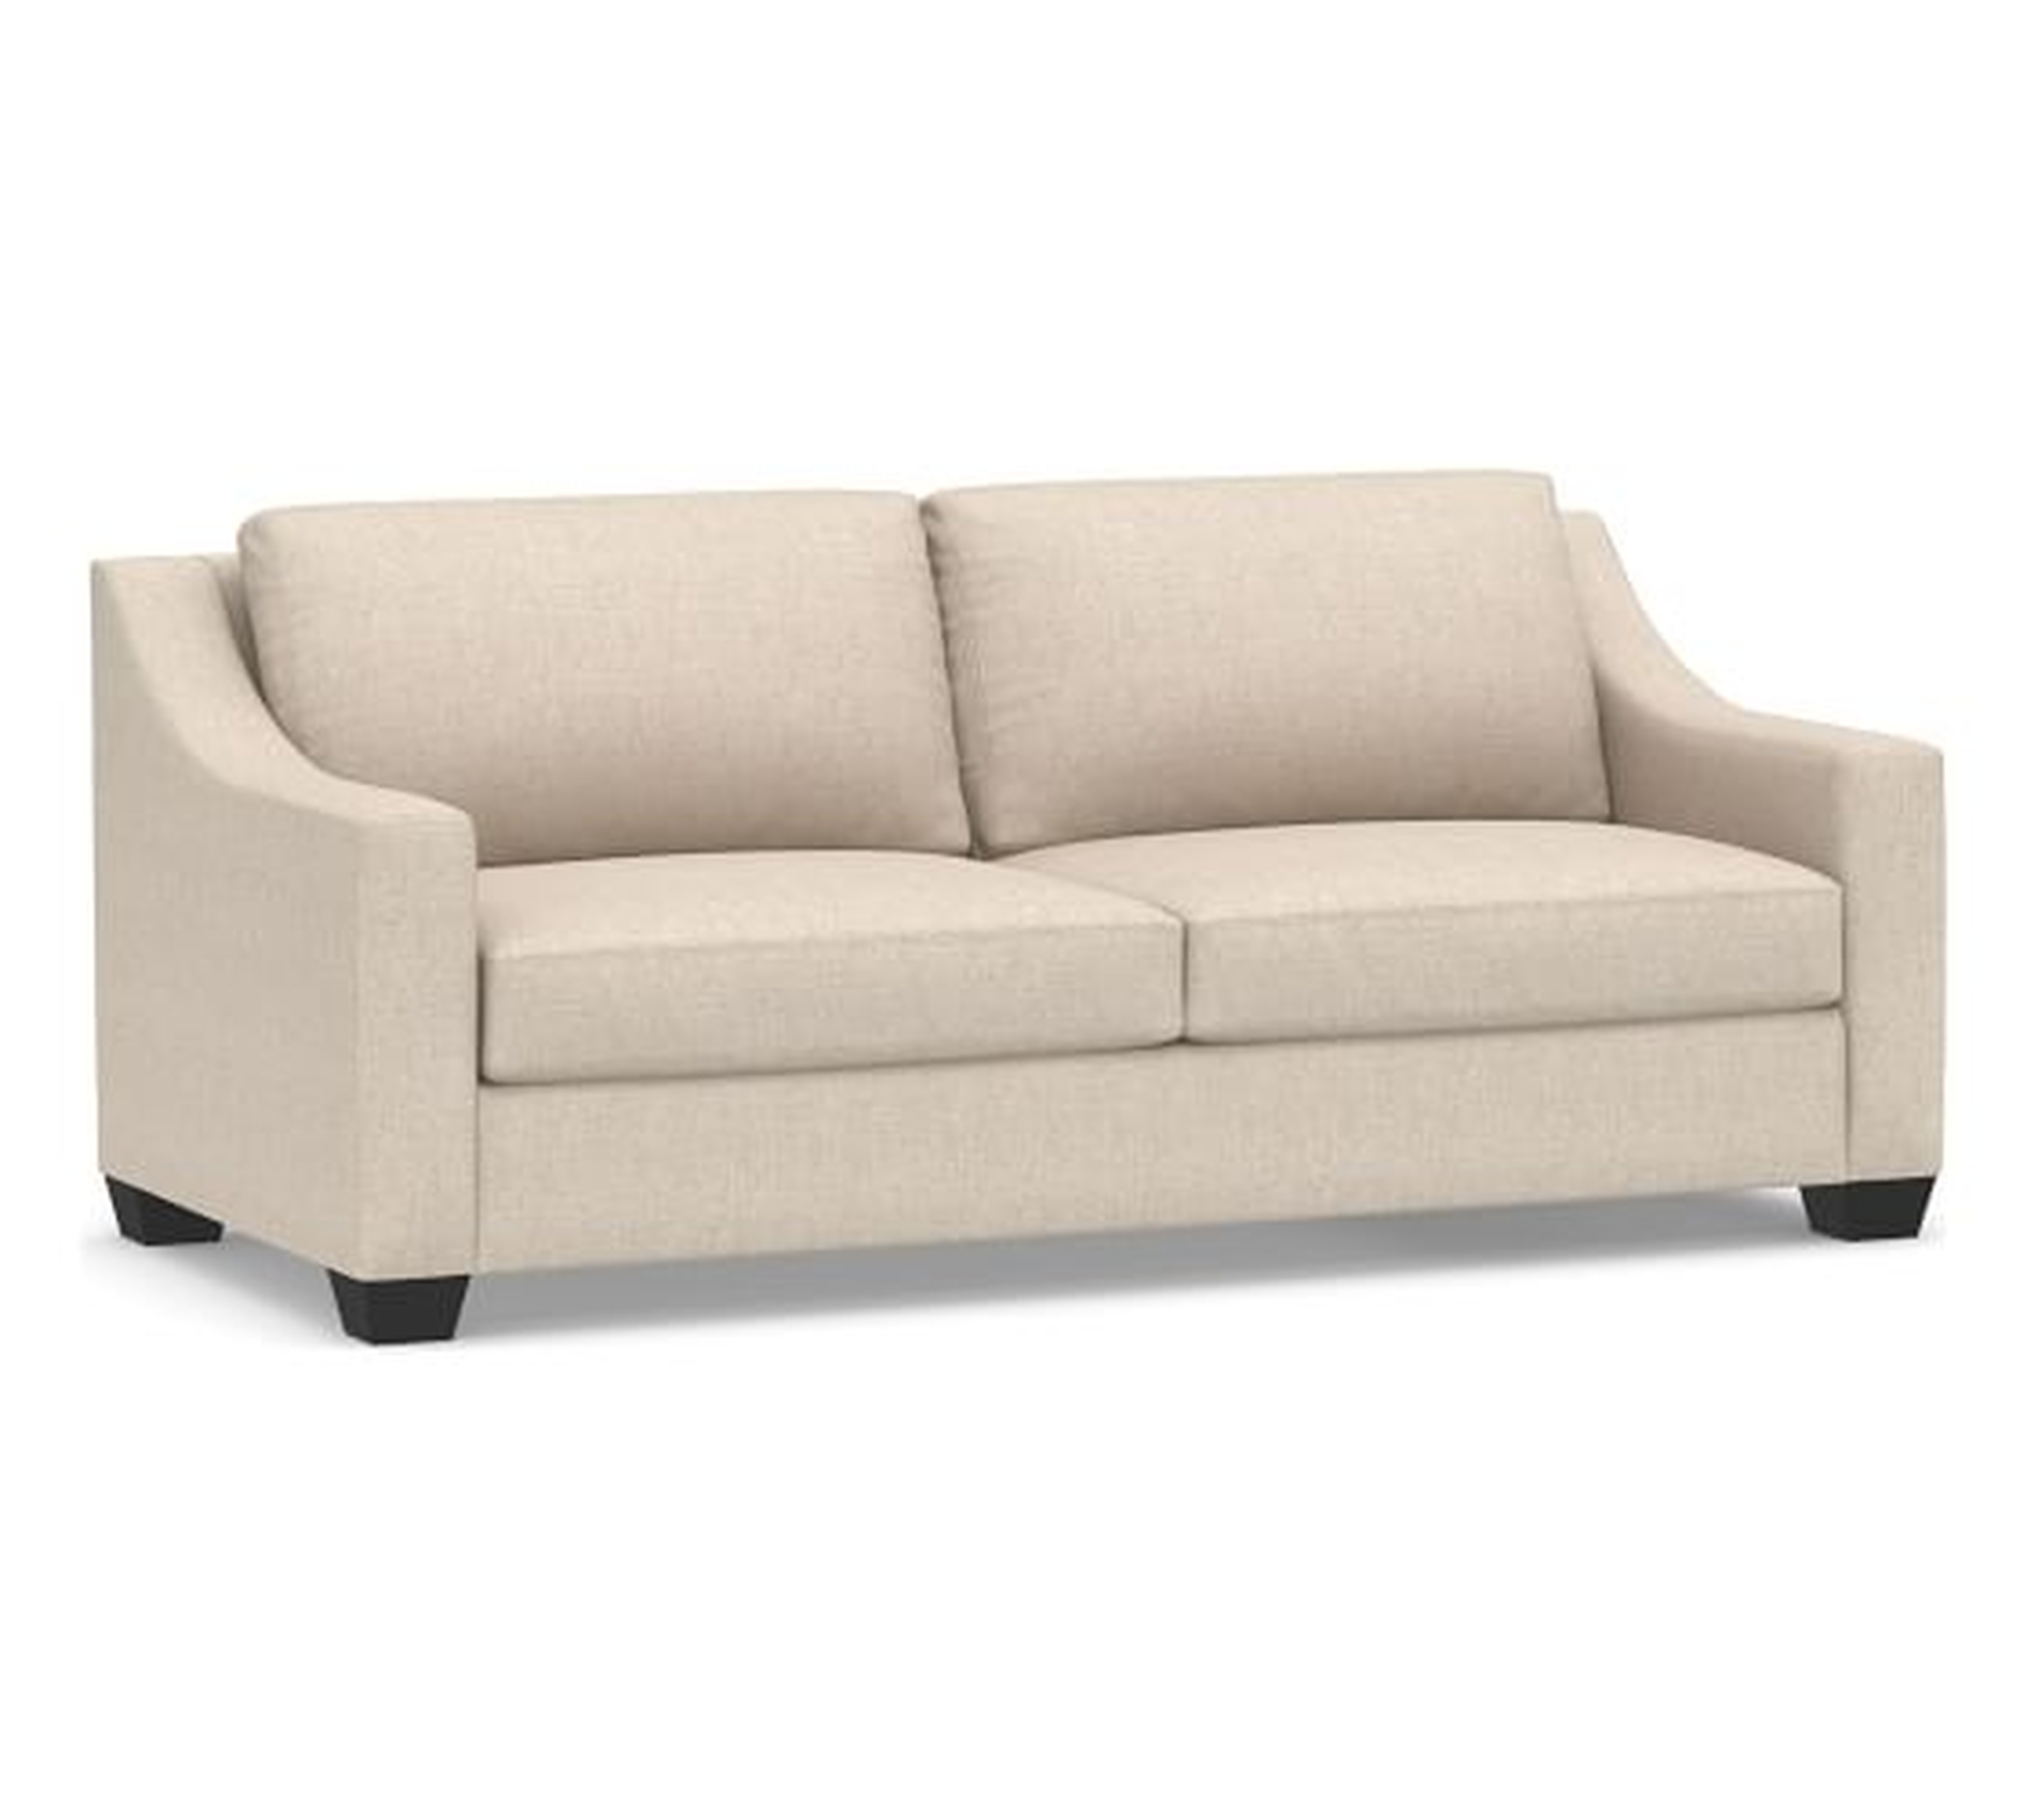 York Slope Upholstered Sofa 80", Down Blend Wrapped Cushions, Performance Everydaylinen(TM) by Crypton(R) Home Oatmeal - Pottery Barn